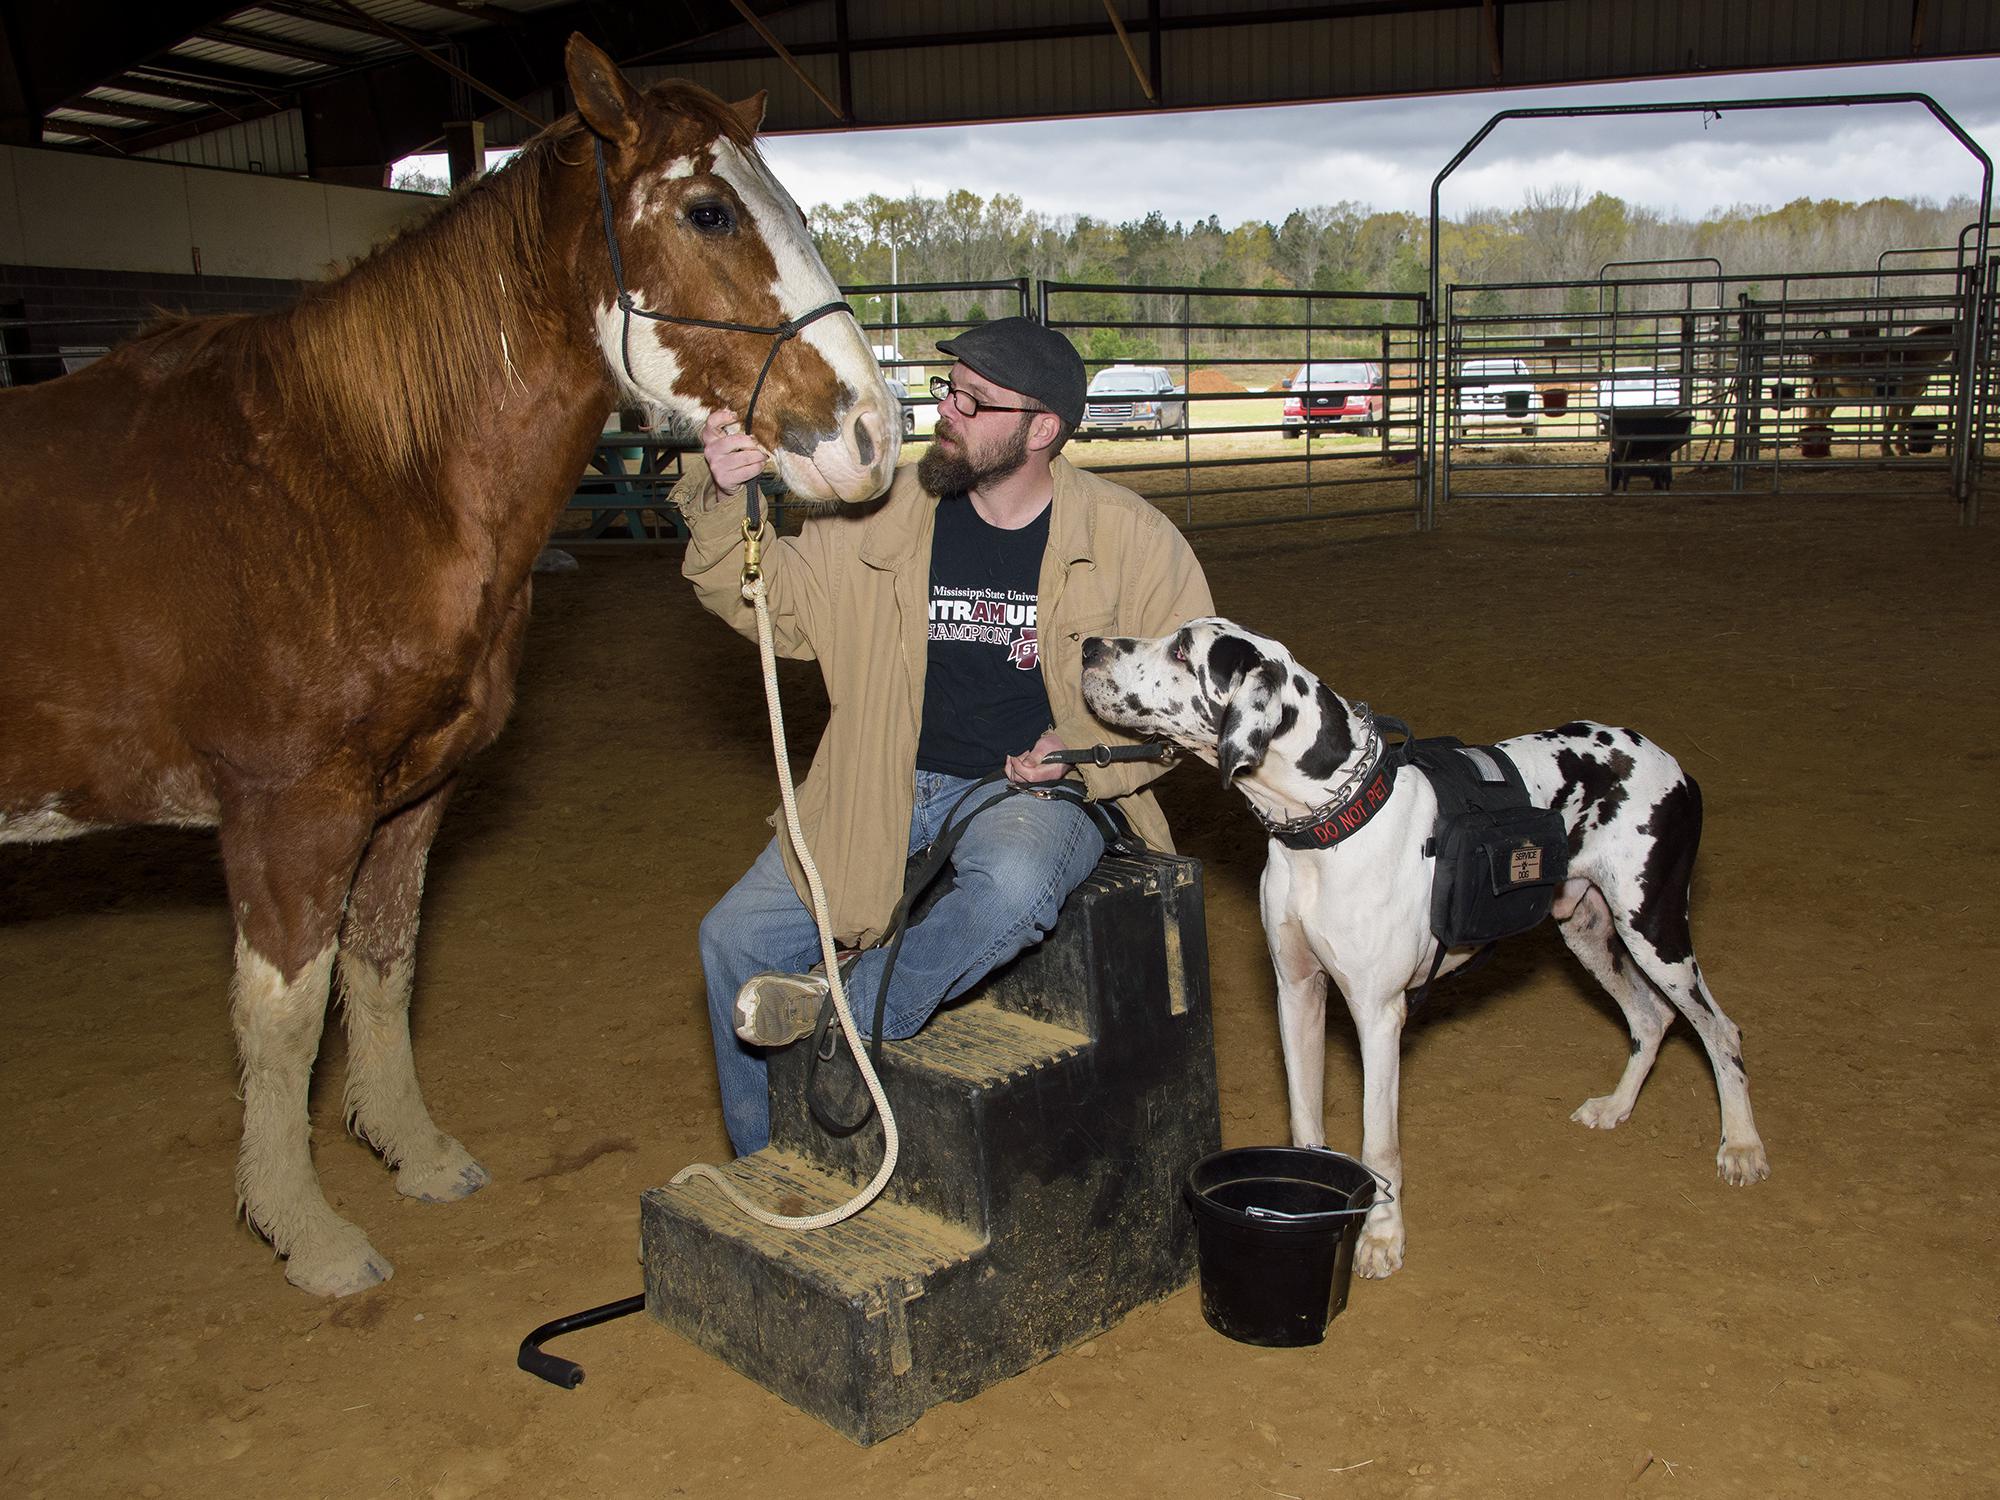 Man seated on a step stool in an arena looks at a horse while a large dog watches cautiously.